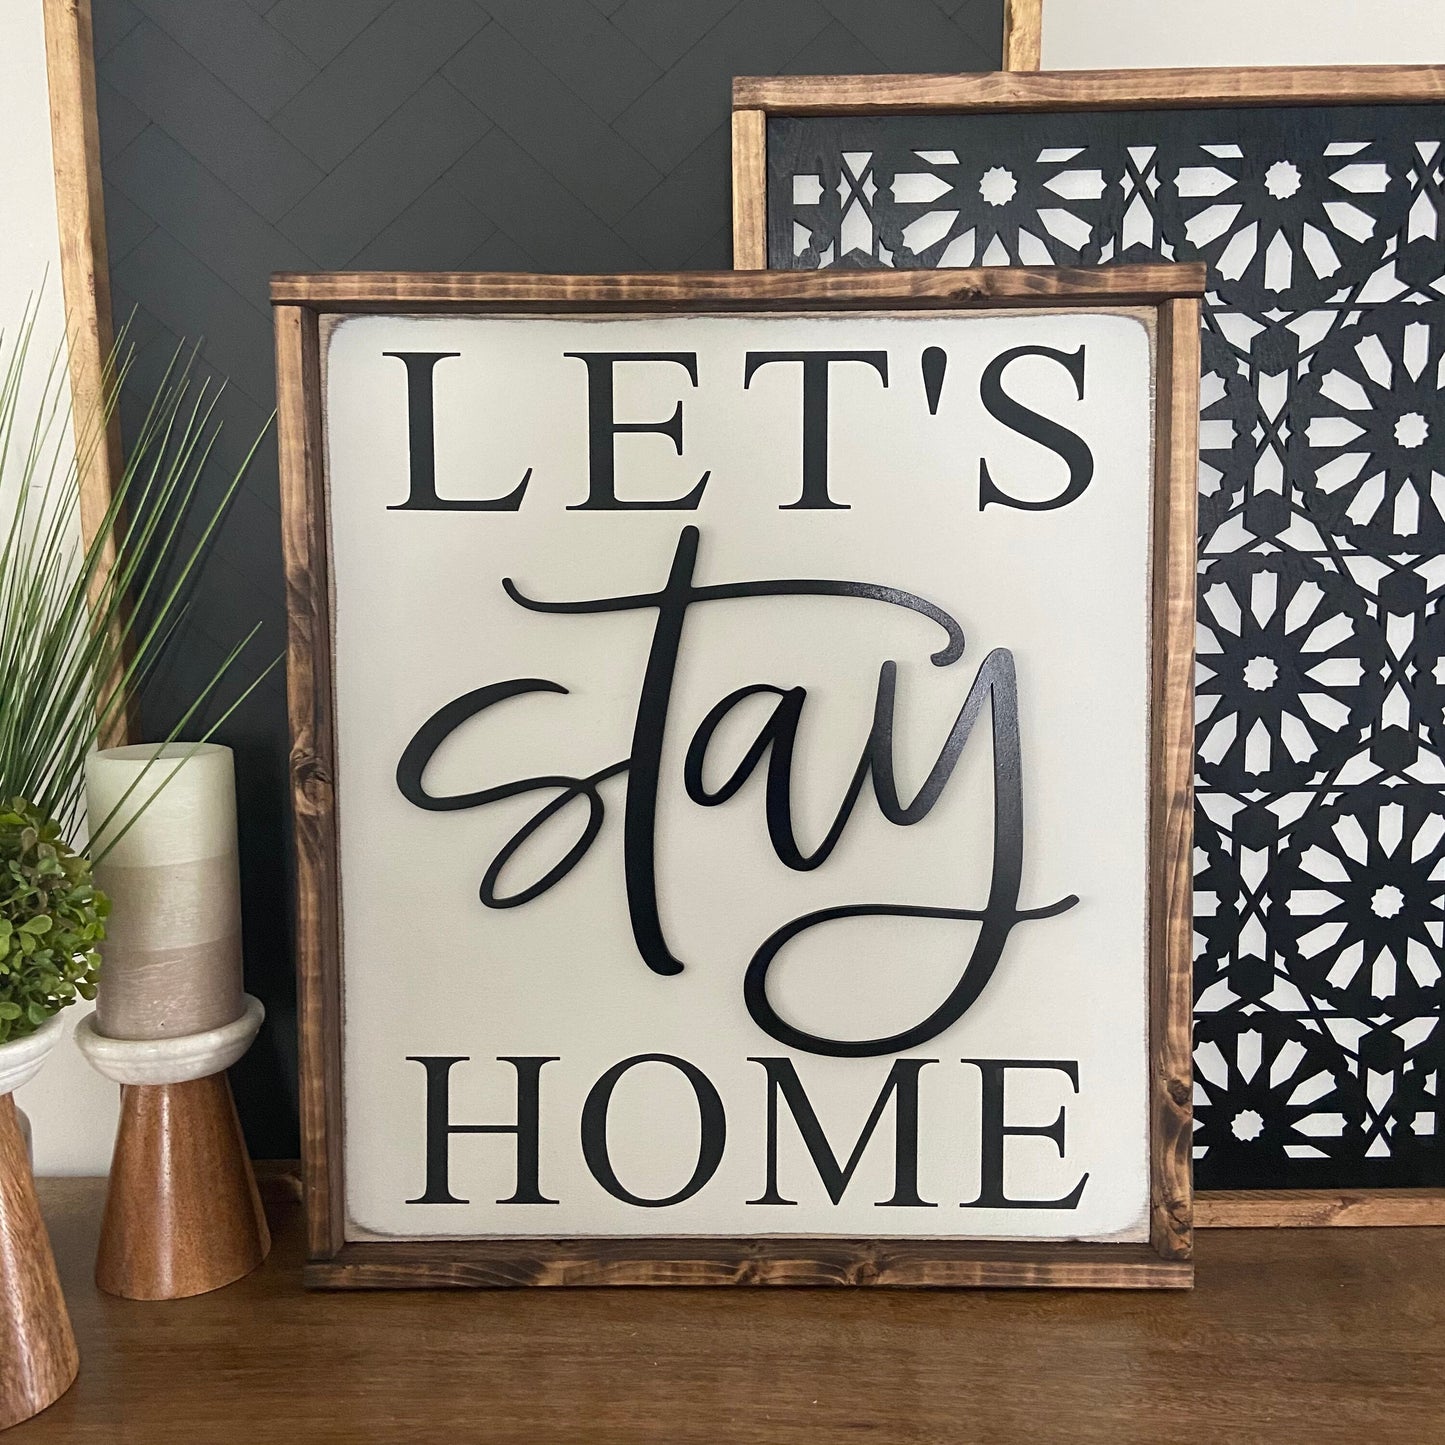 let’s stay home - entryway, living room sign [FREE SHIPPING!]